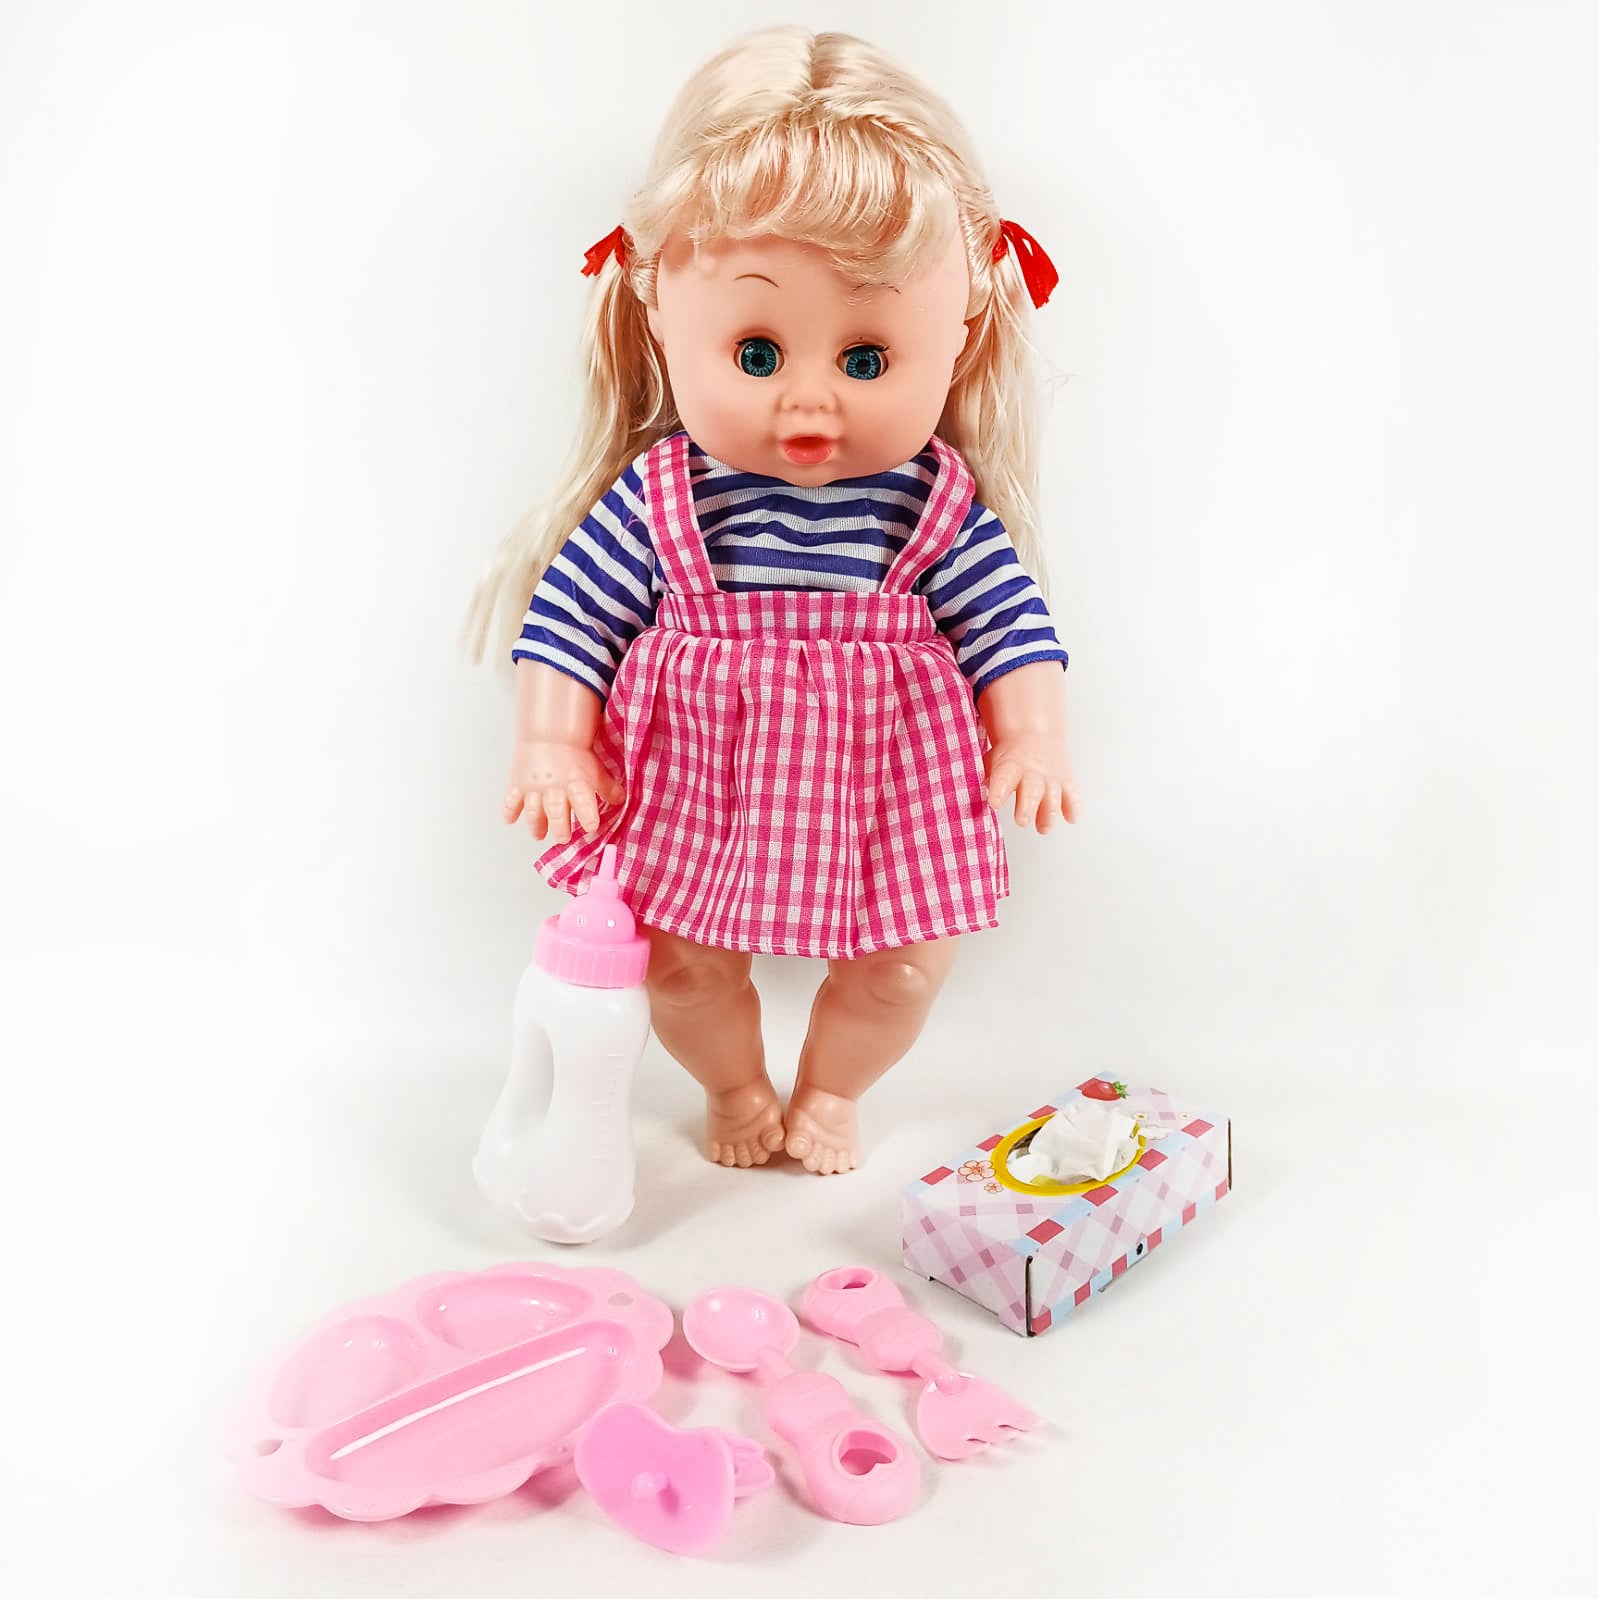 Lovely Baby Doll With Her Feeder and Other Accessories